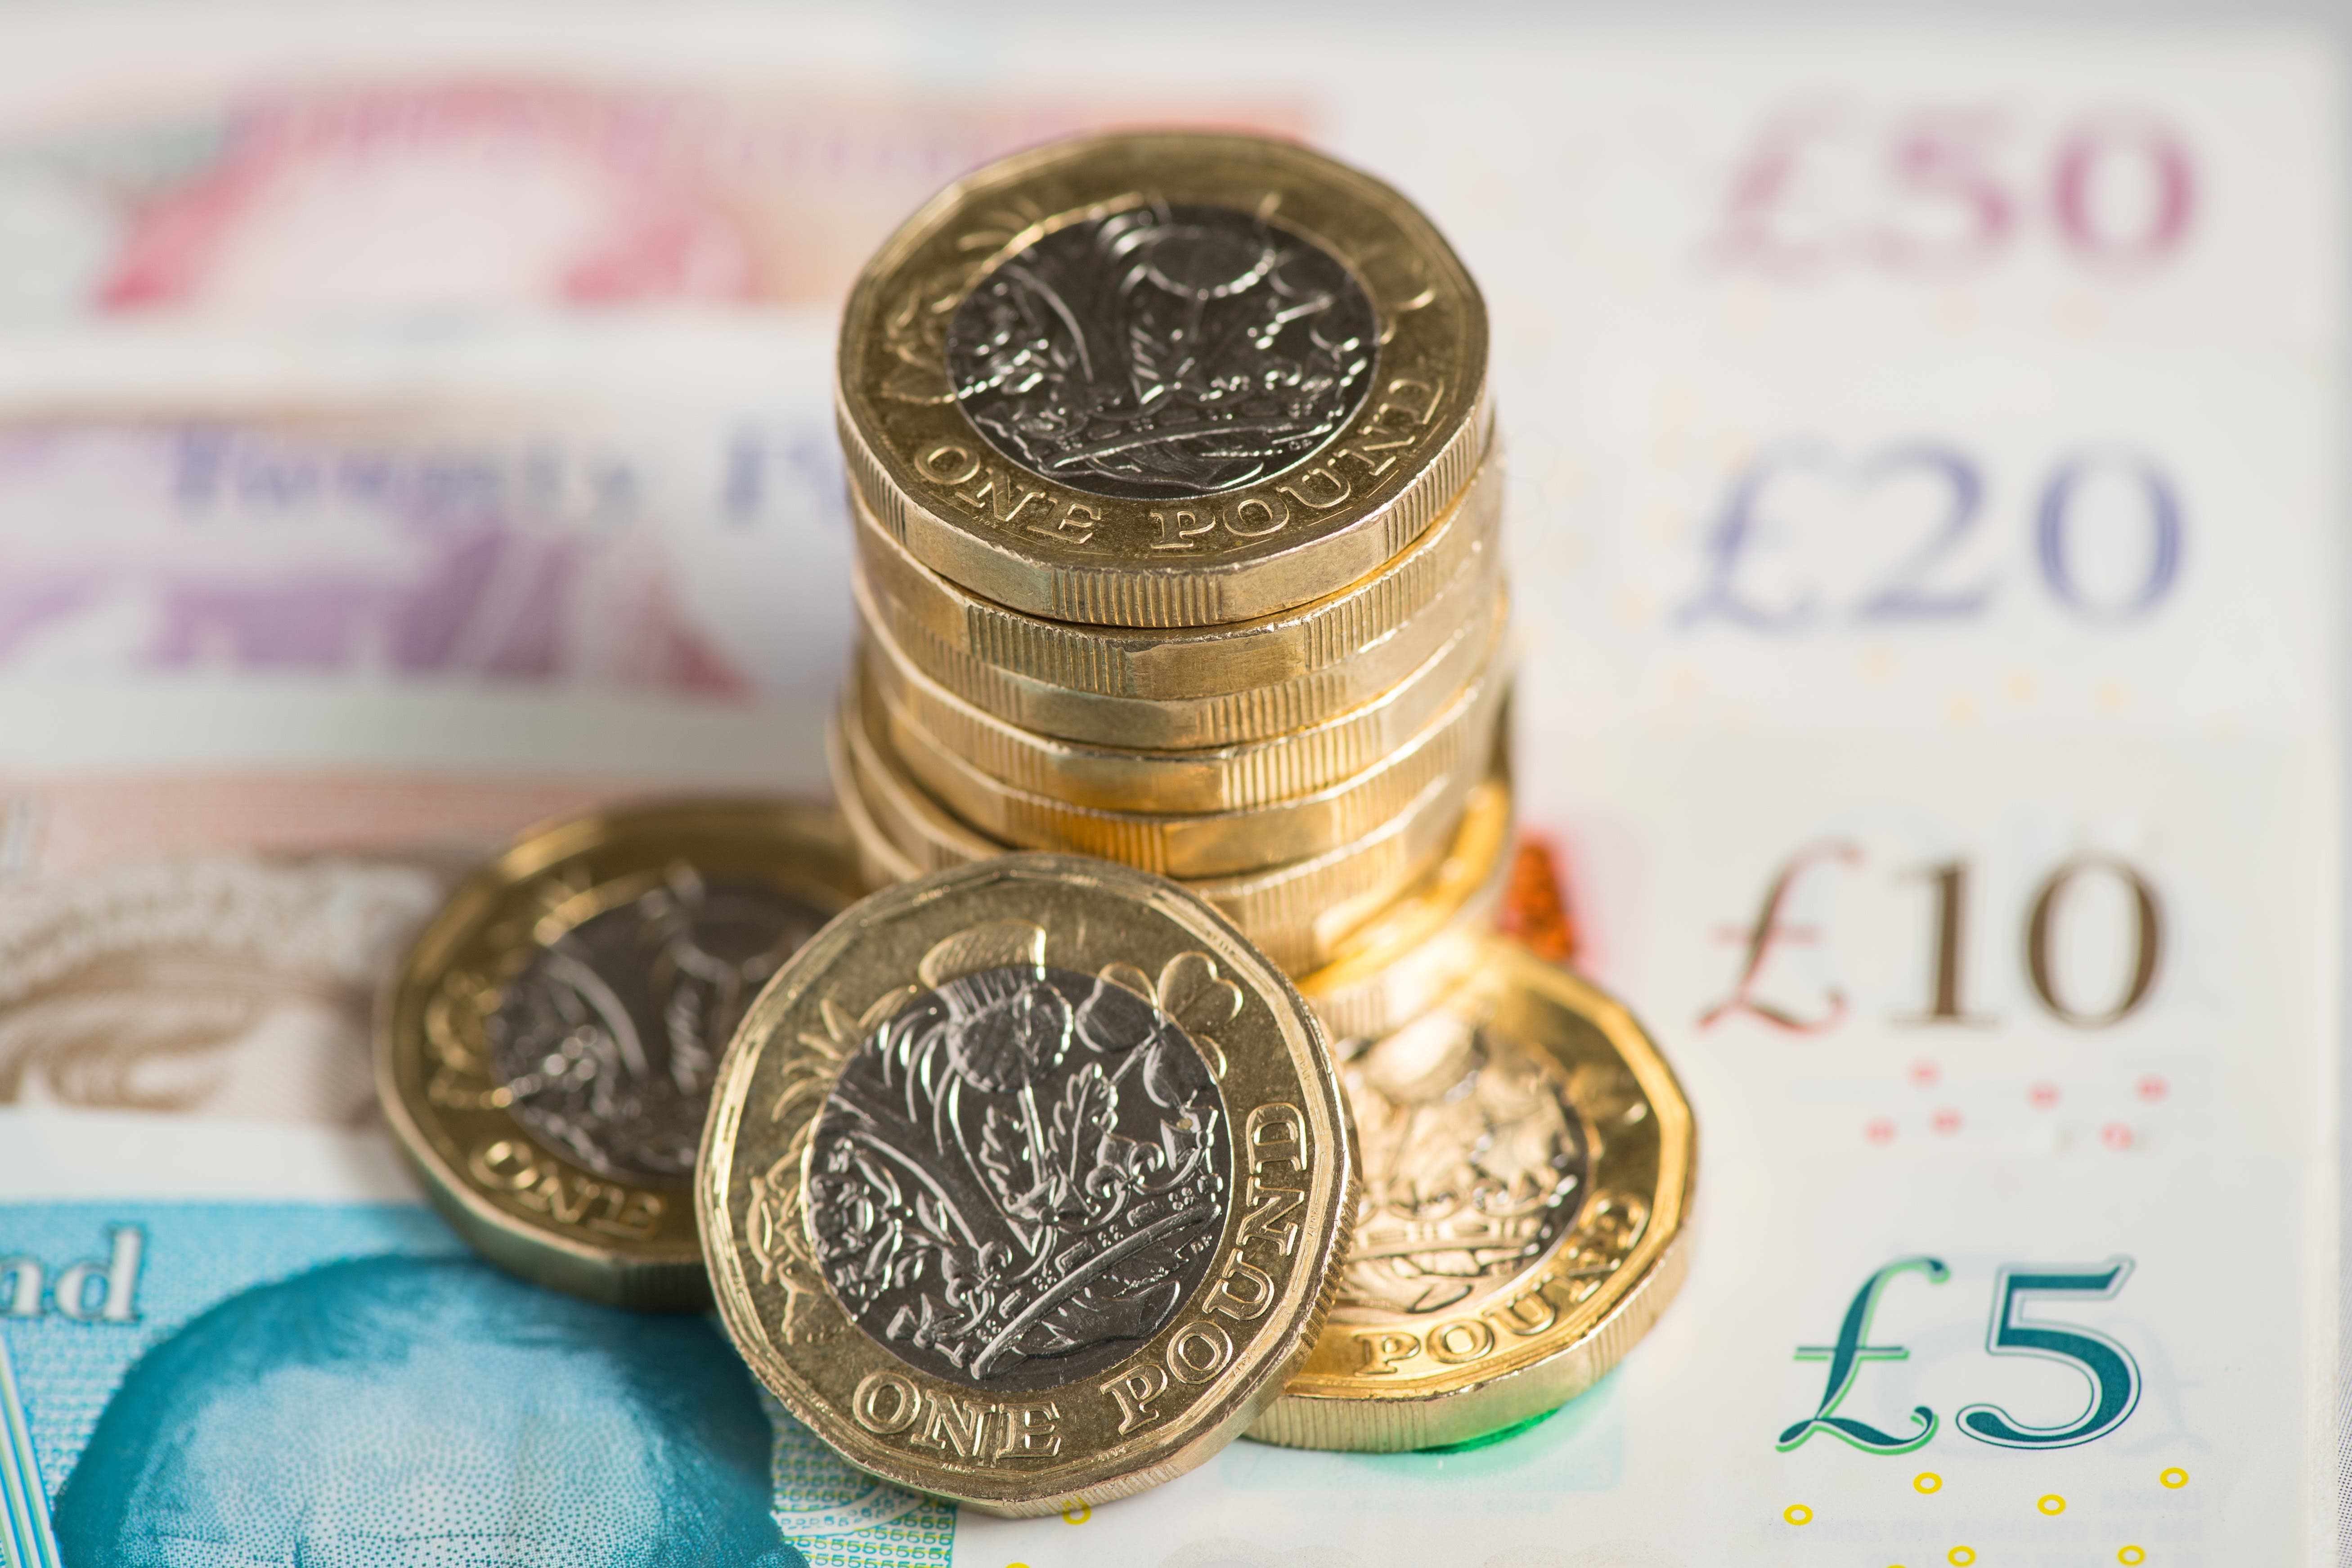 More will be pulled into low pay problems by soaring inflation